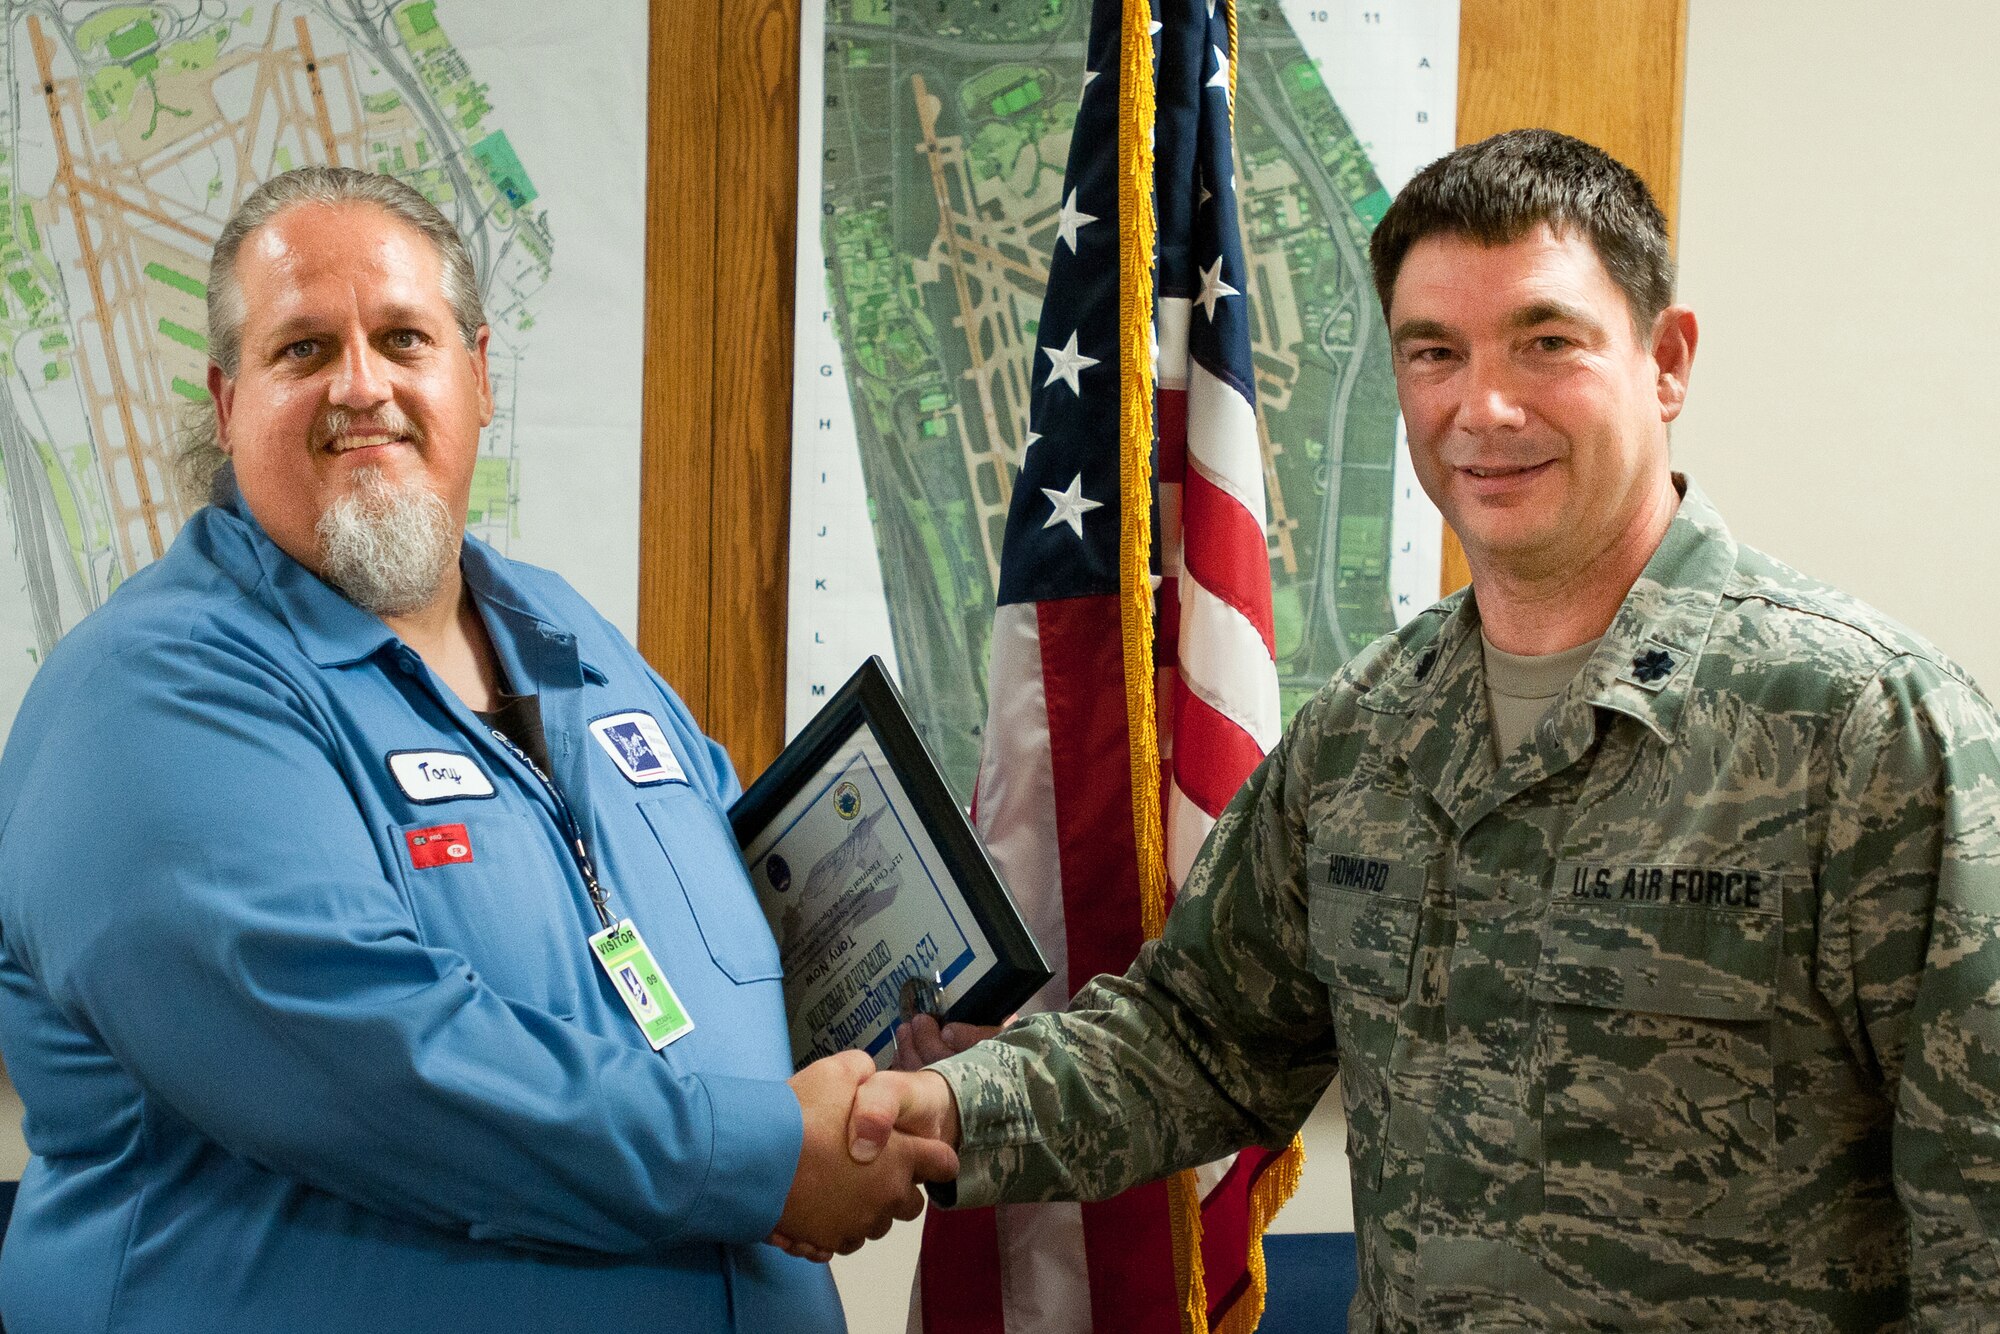 Kentucky Air National Guard Lt. Col. Phillip Howard, commander of the 123rd Civil Engineer Squadron, presents a certificate to Tony Roy, an airfield technician with the Louisville Regional Airport Authority in Louisville, Ky., on Sept. 21, 2012. Roy helped train Kentucky Air Guard civil engineers on the maintenance of commercial airfield lighting equipment, which enhanced their mission effectiveness during a 2011 deployment to Afghanistan. (Kentucky Air National Guard photo by Master Sgt. Phil Speck)